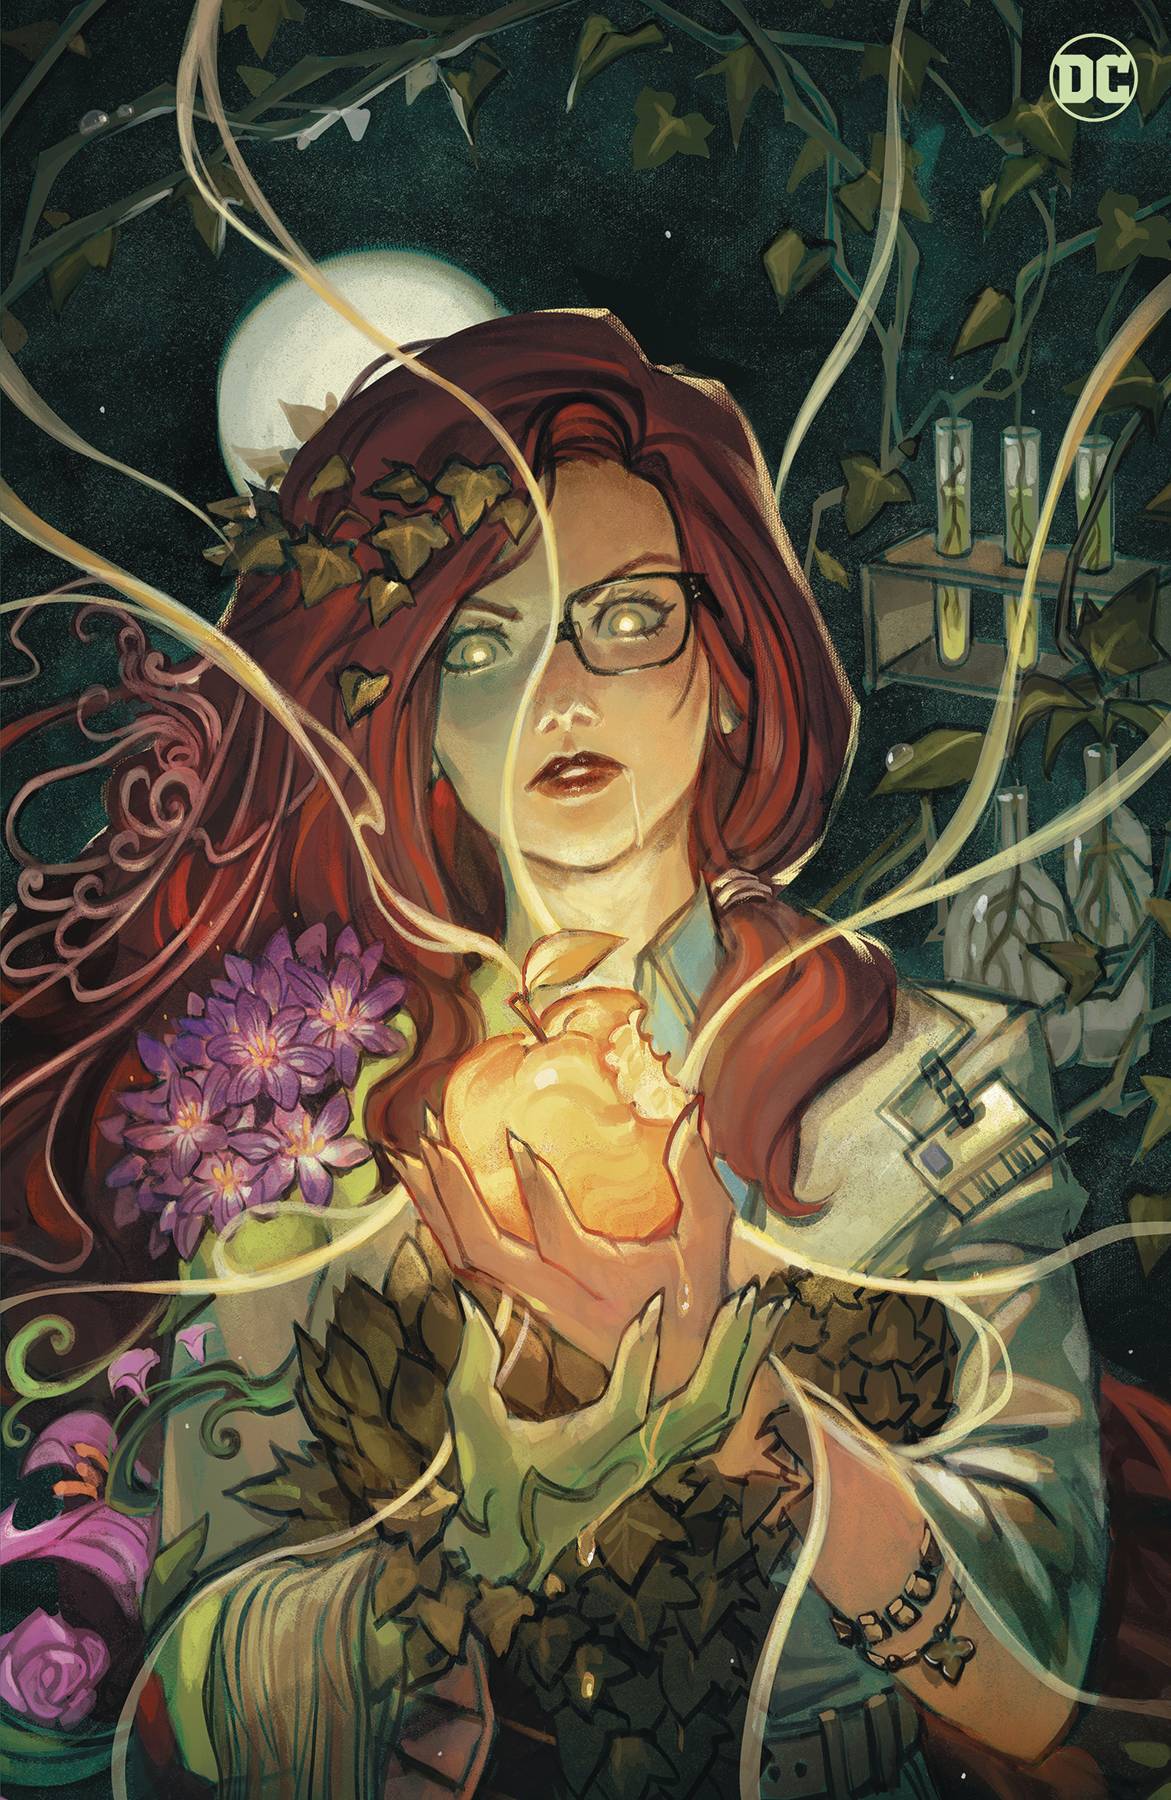 POISON IVY #19 | SELECT VARIANT COVERS | 2024